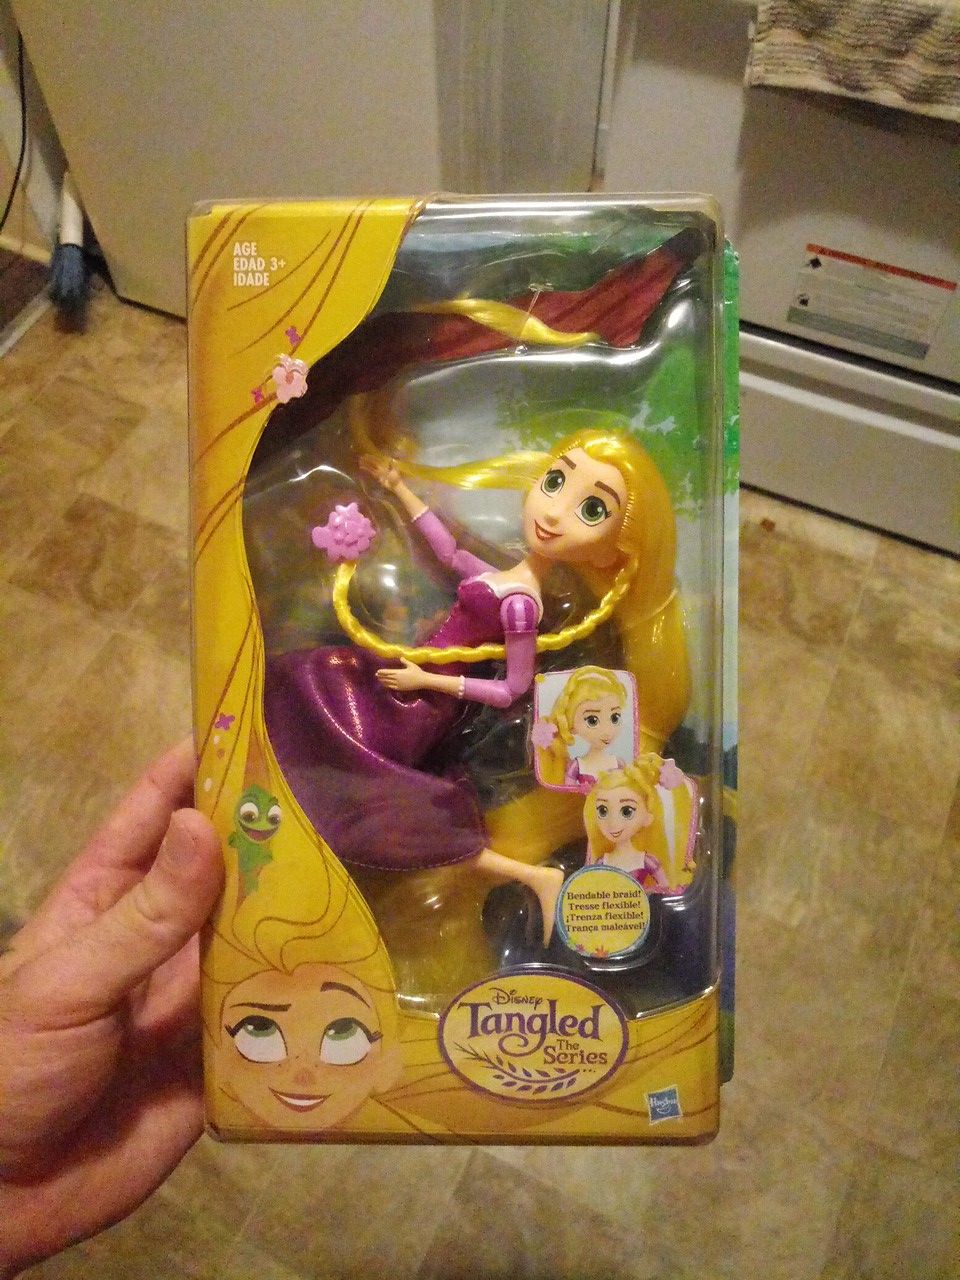 Tangled series doll and Belle shimmer series doll